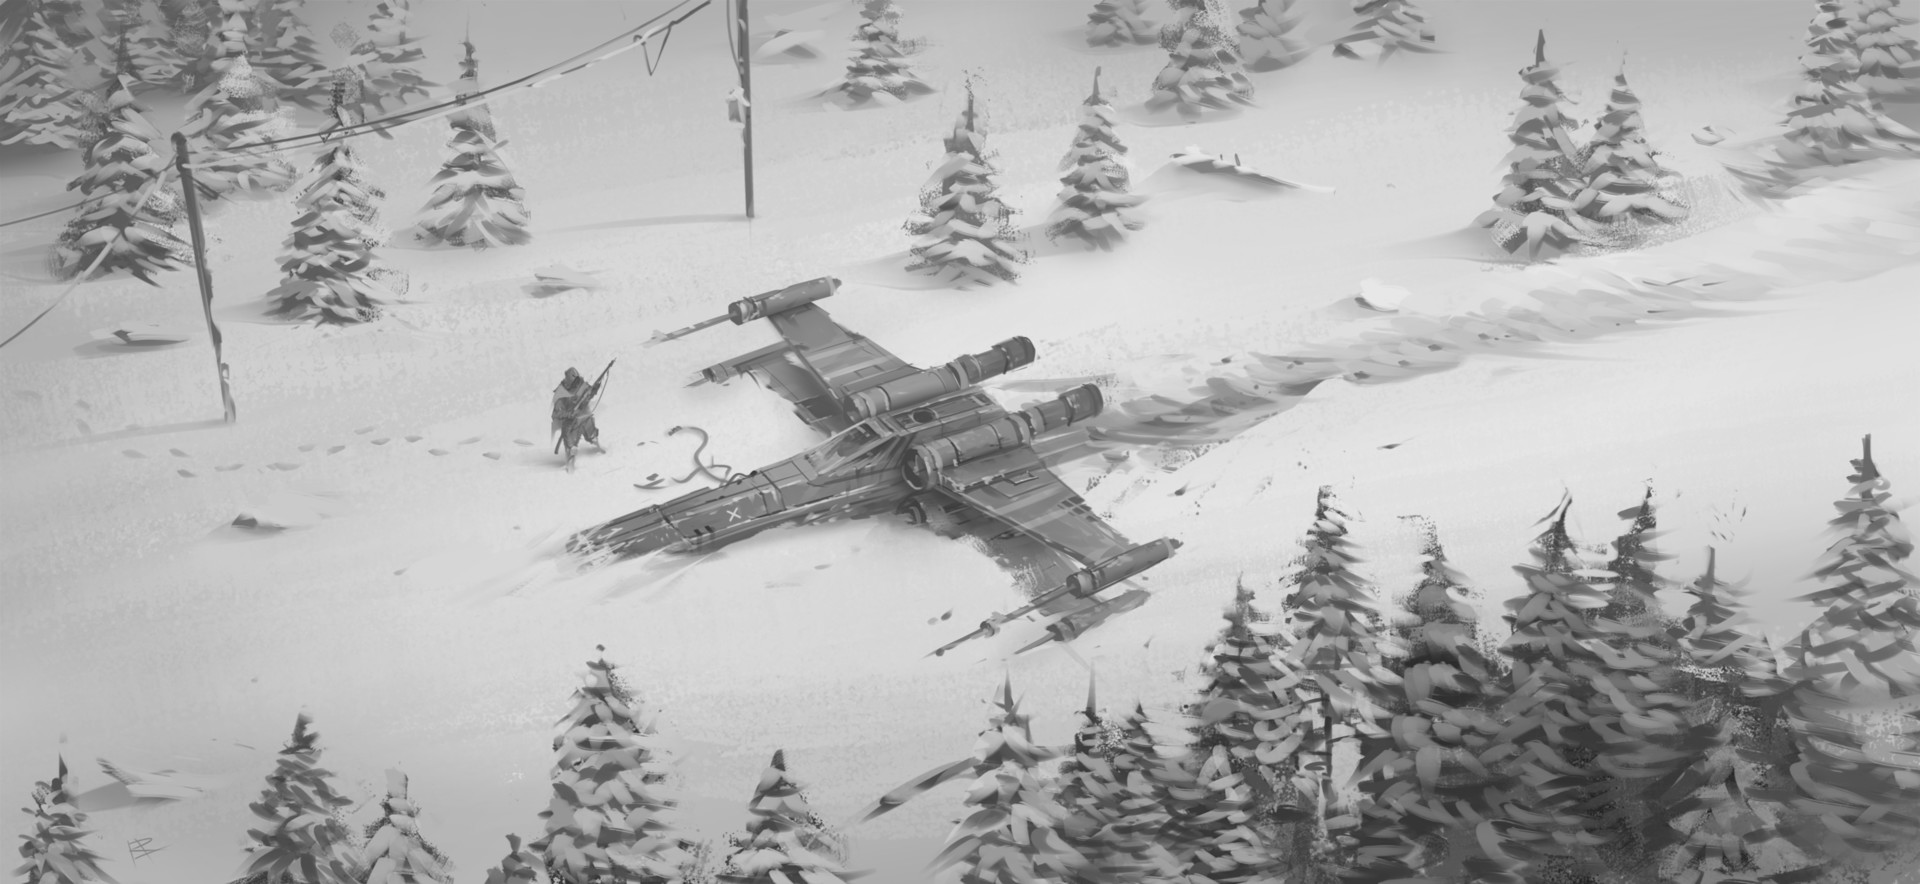 General 1920x884 environment snow trees weapon science fiction crash X-wing Star Wars winter pine trees